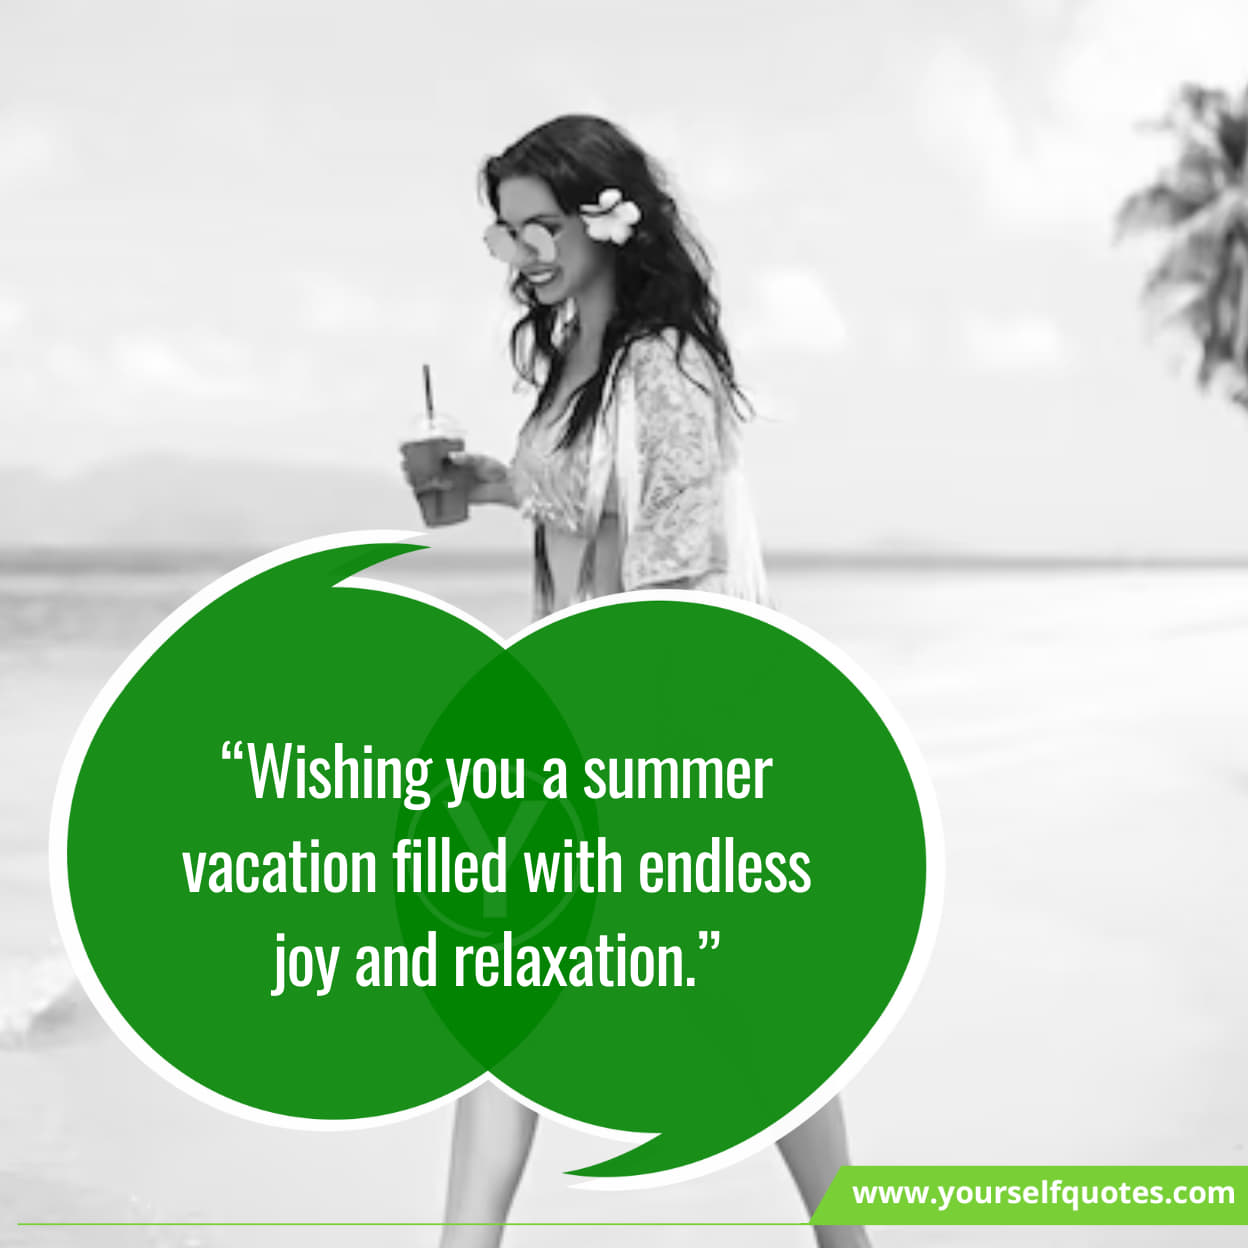 Exciting quotes for your summer travel plans